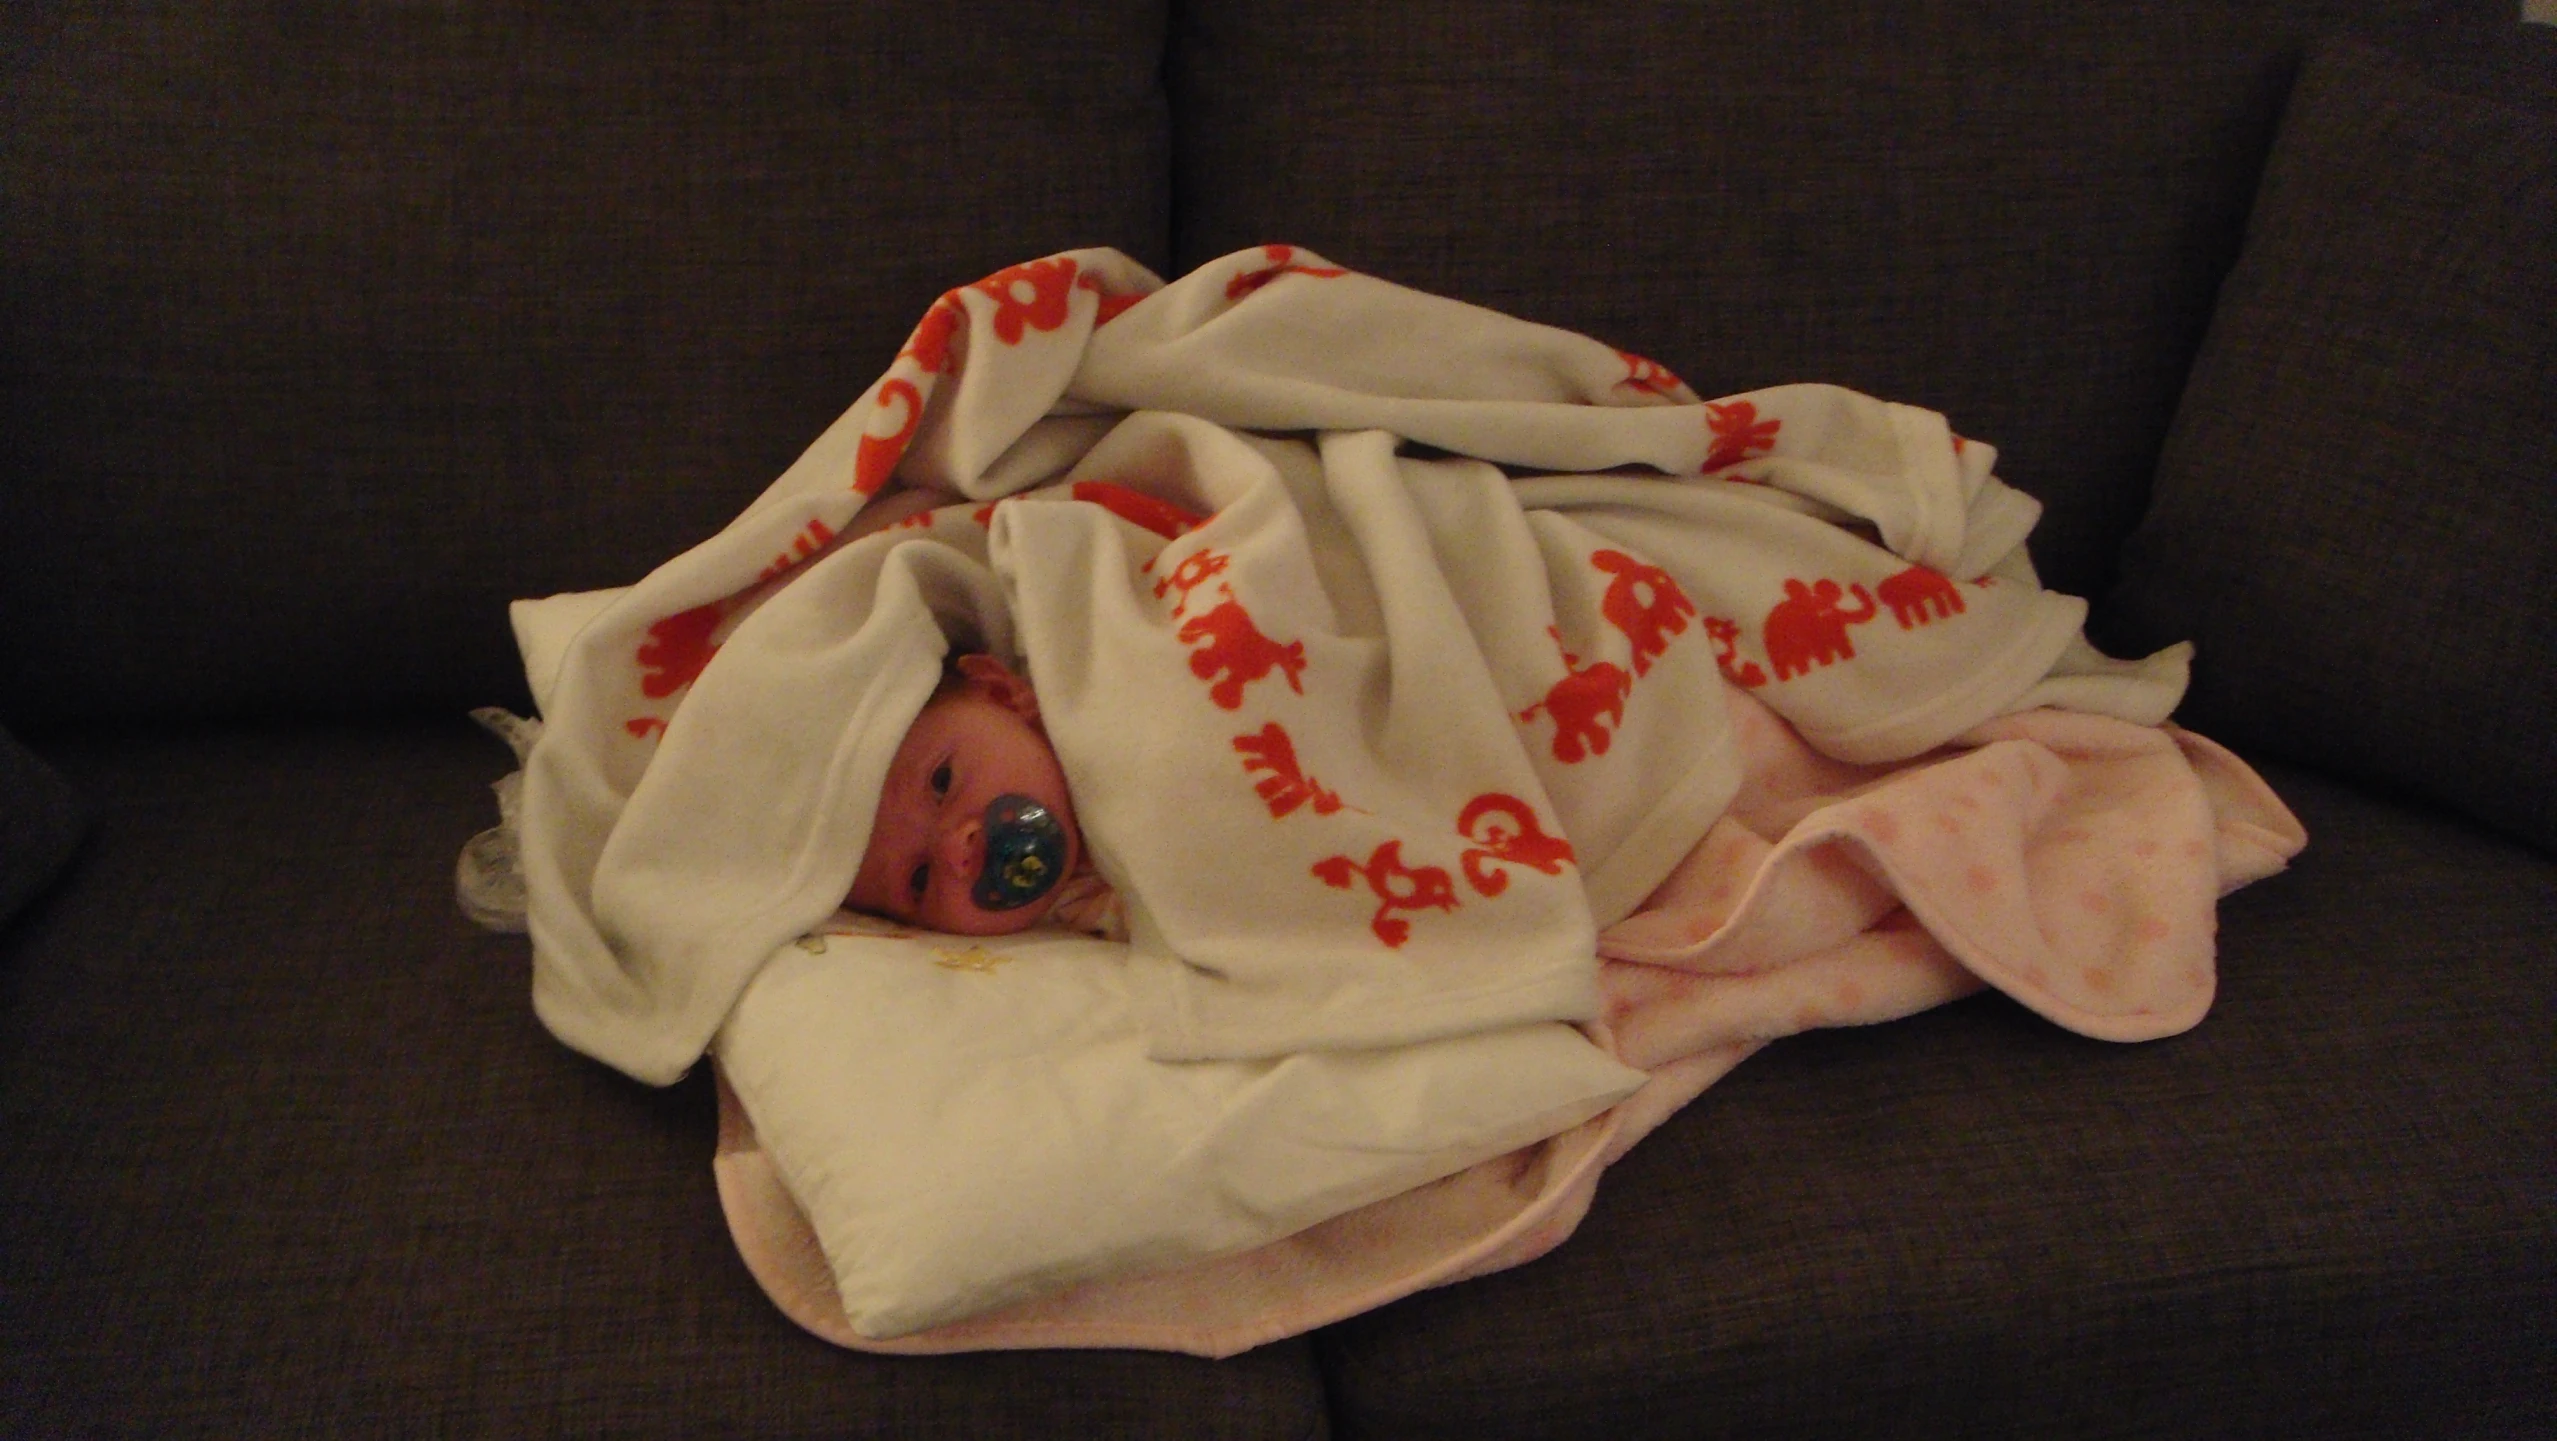 a baby wrapped up in a blanket on a couch